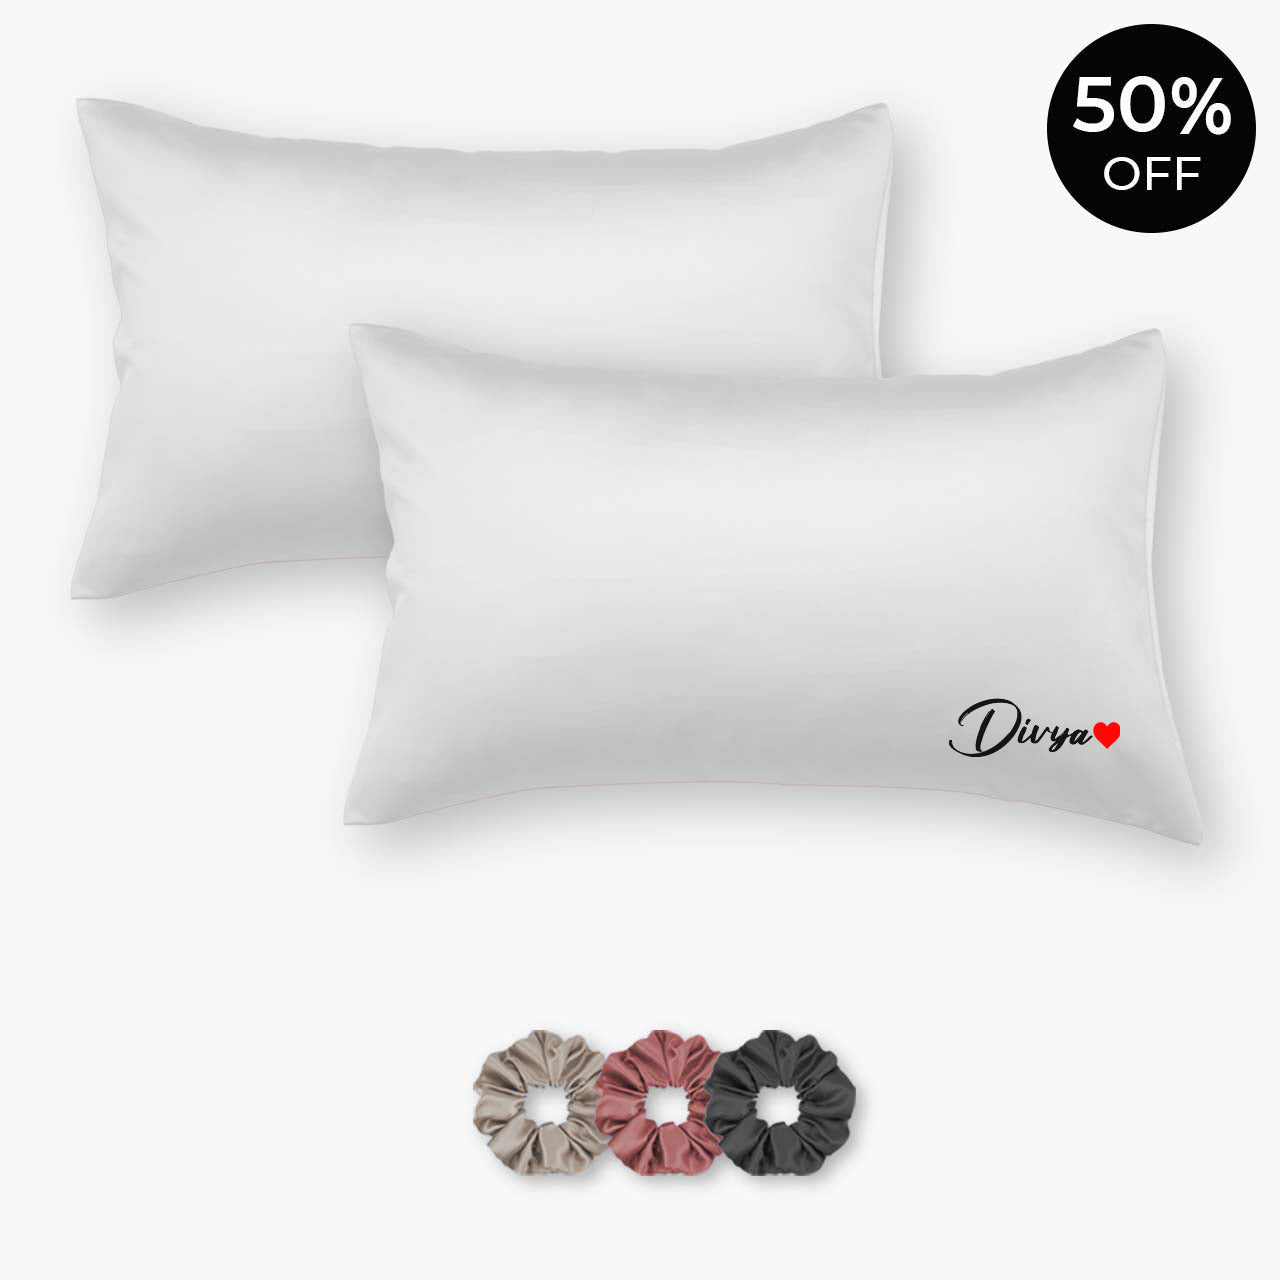 Load image into Gallery viewer, Personalized Satin Pillowcases - Pack of 2 (With 3 free scrunchies)
